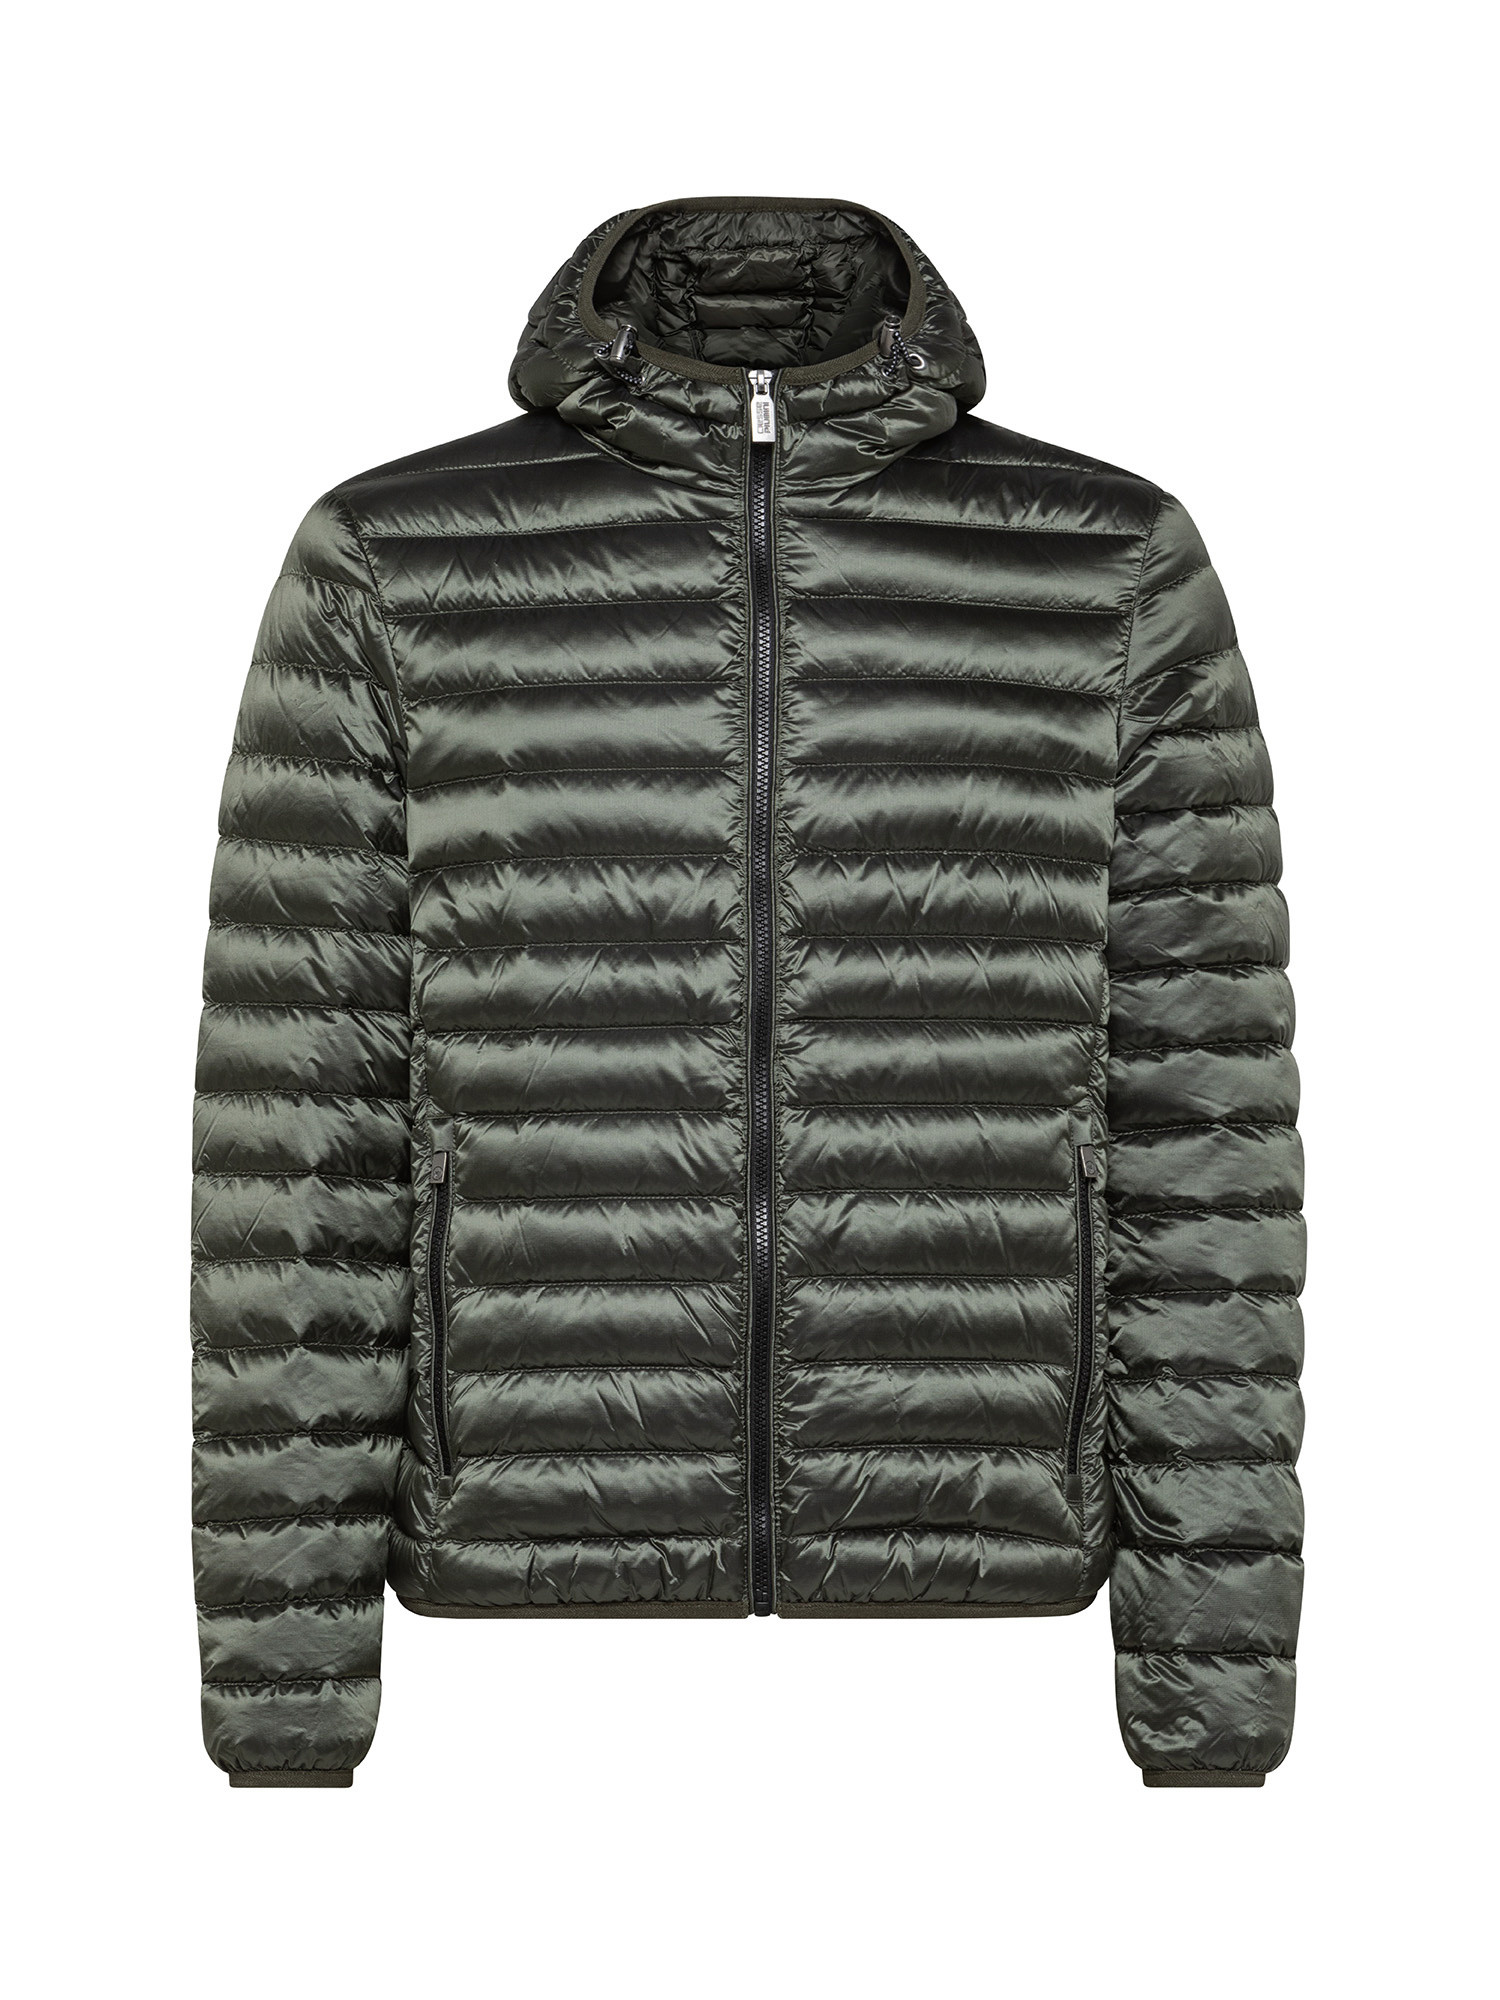 Ciesse Piumini - Down jacket with hood in nylon, Green, large image number 0